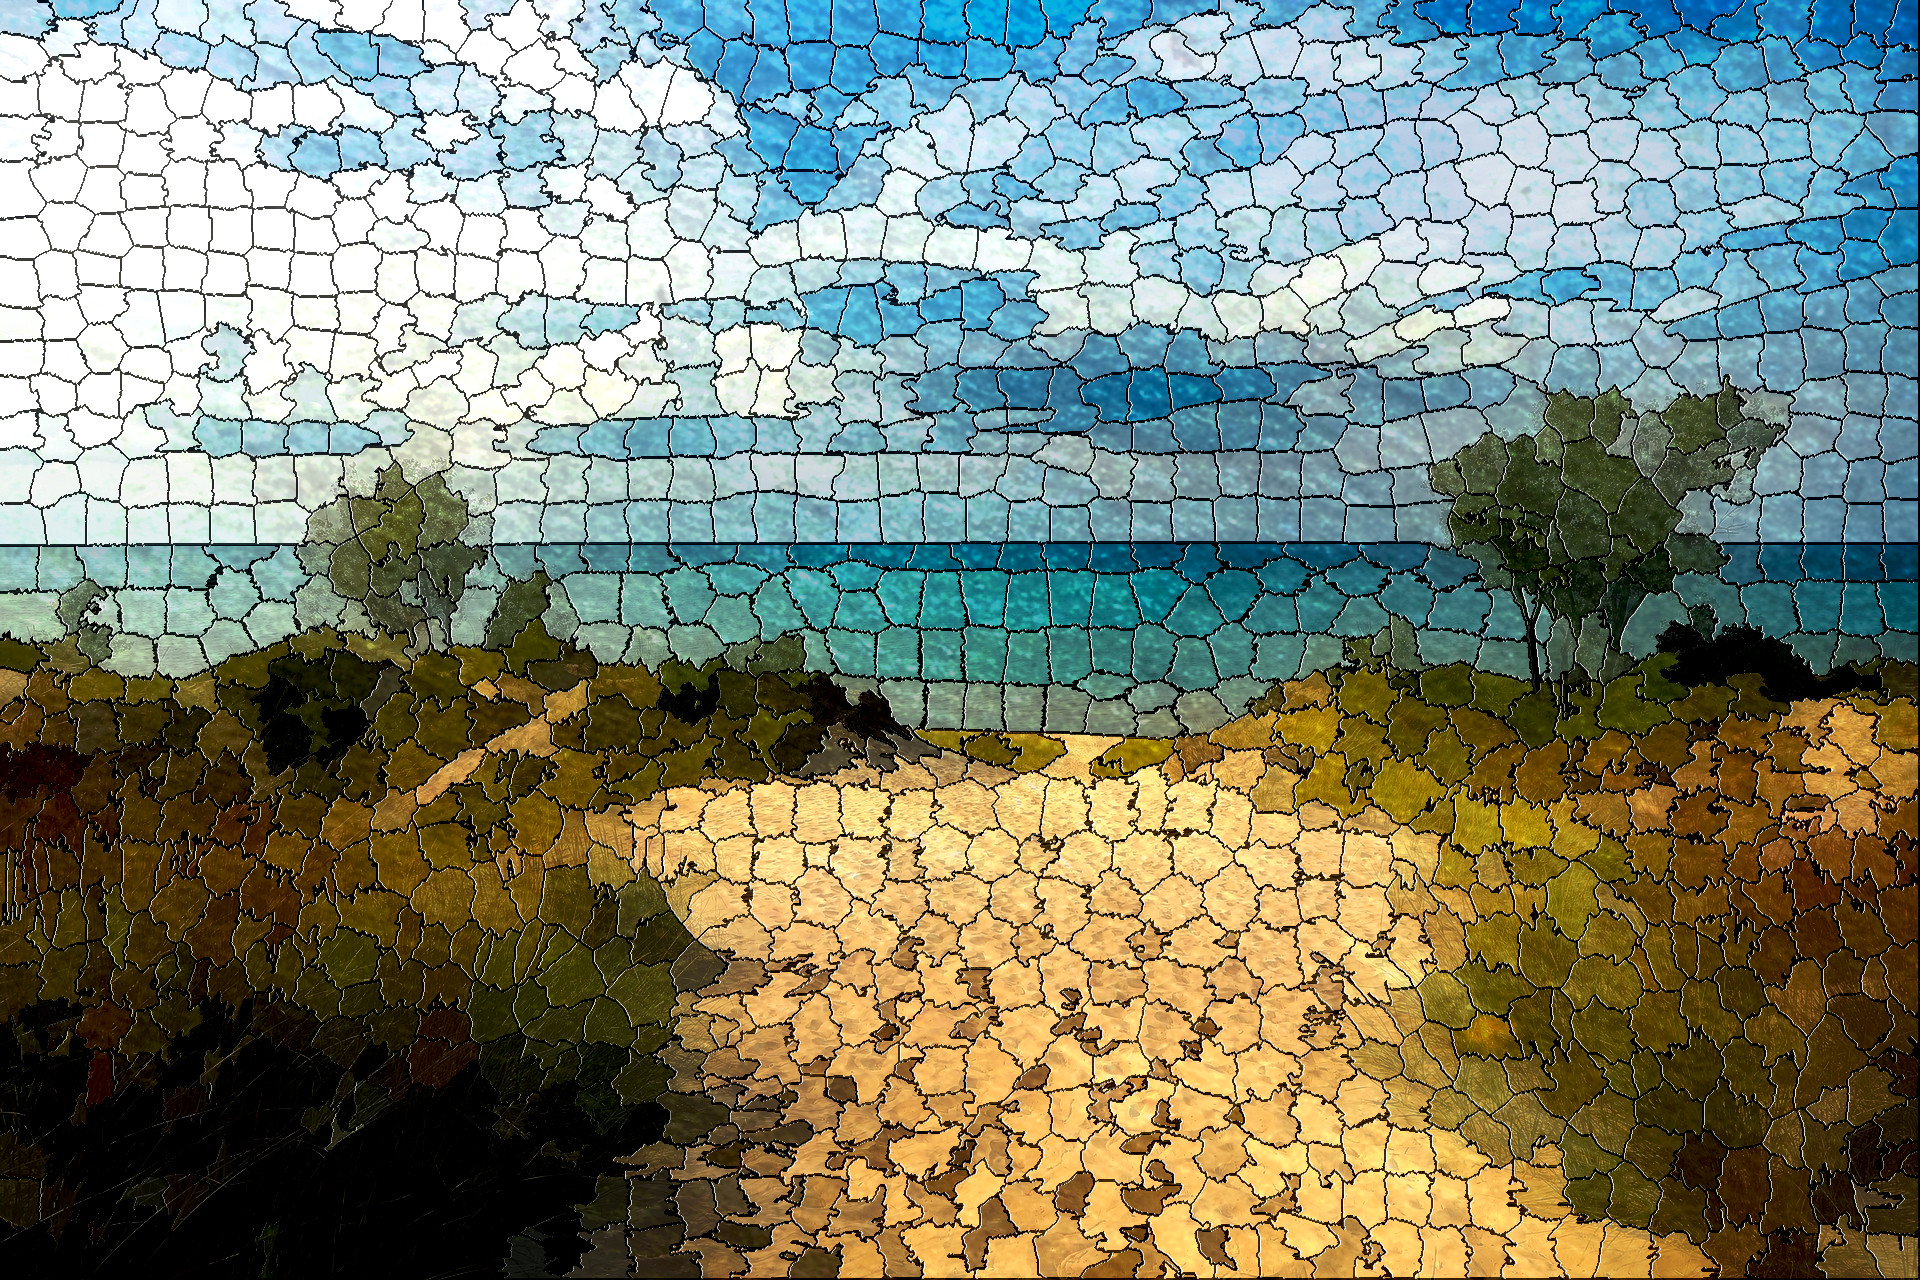 2023-08-29 06-56-52indiana-dunes-state-park-1848559_1920 with a simple mosaic effect.jpeg